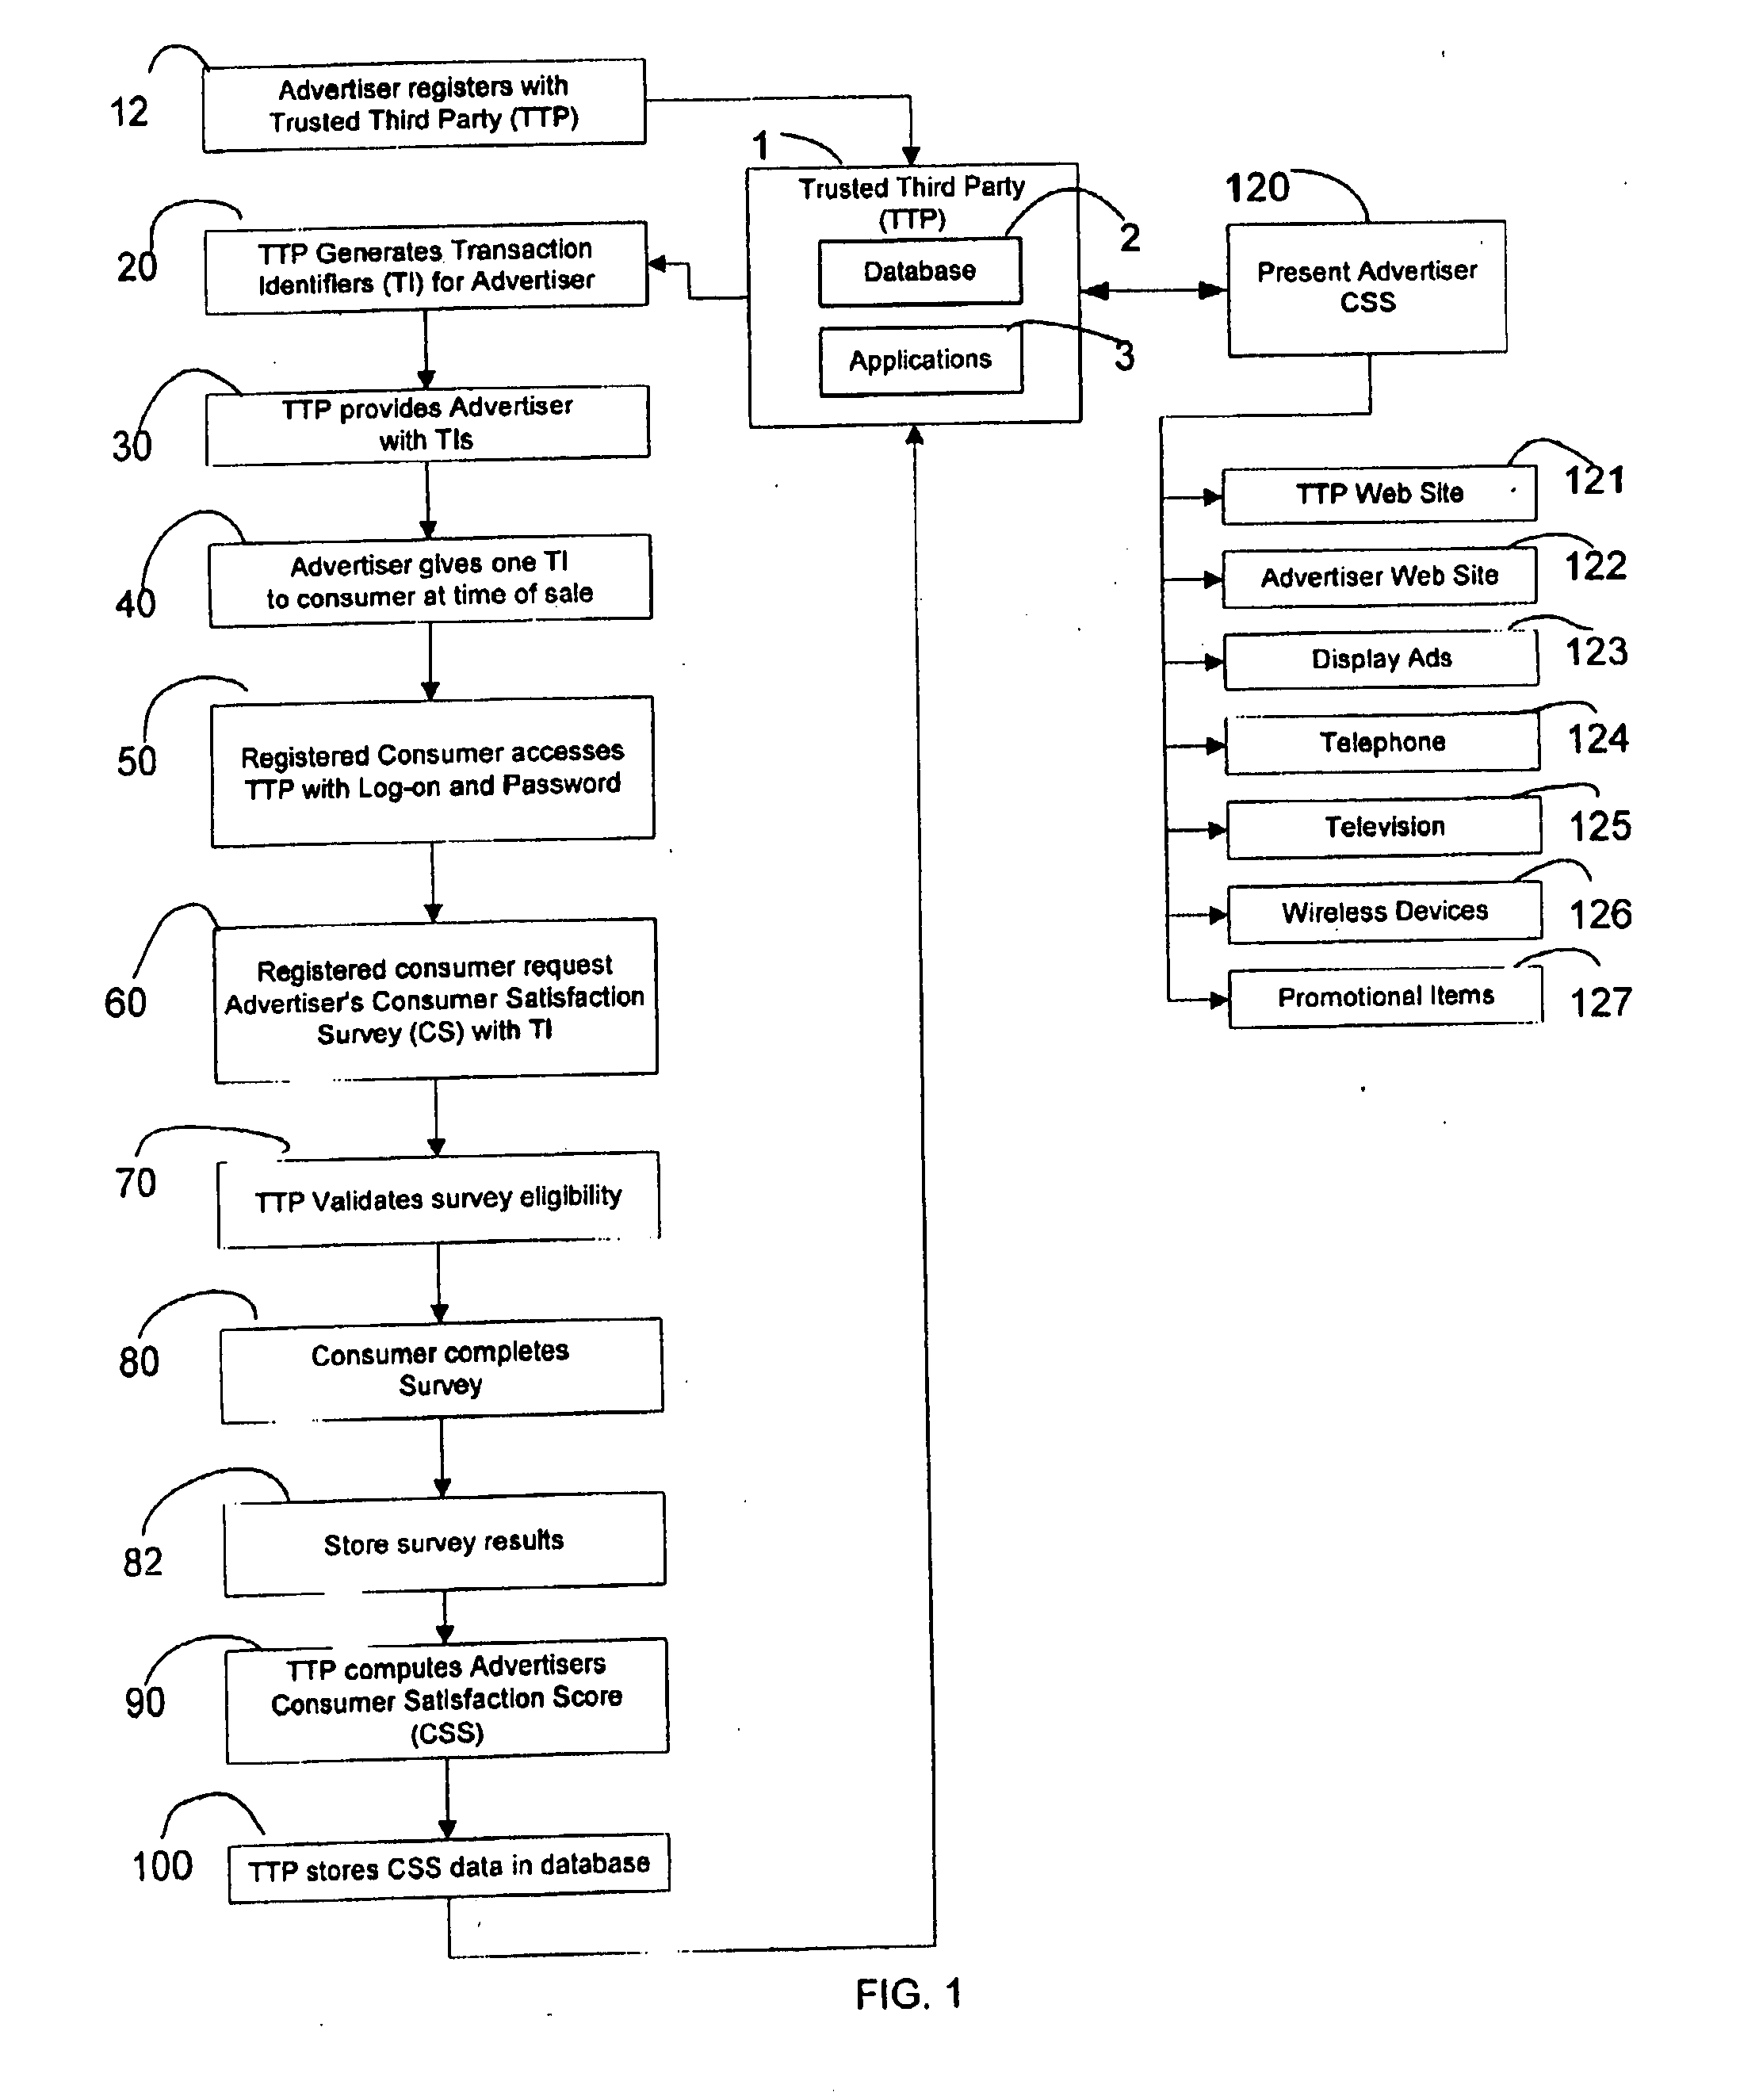 Method and Process for Capturing, Storing, Processing and Displaying Customer Satisfaction Information